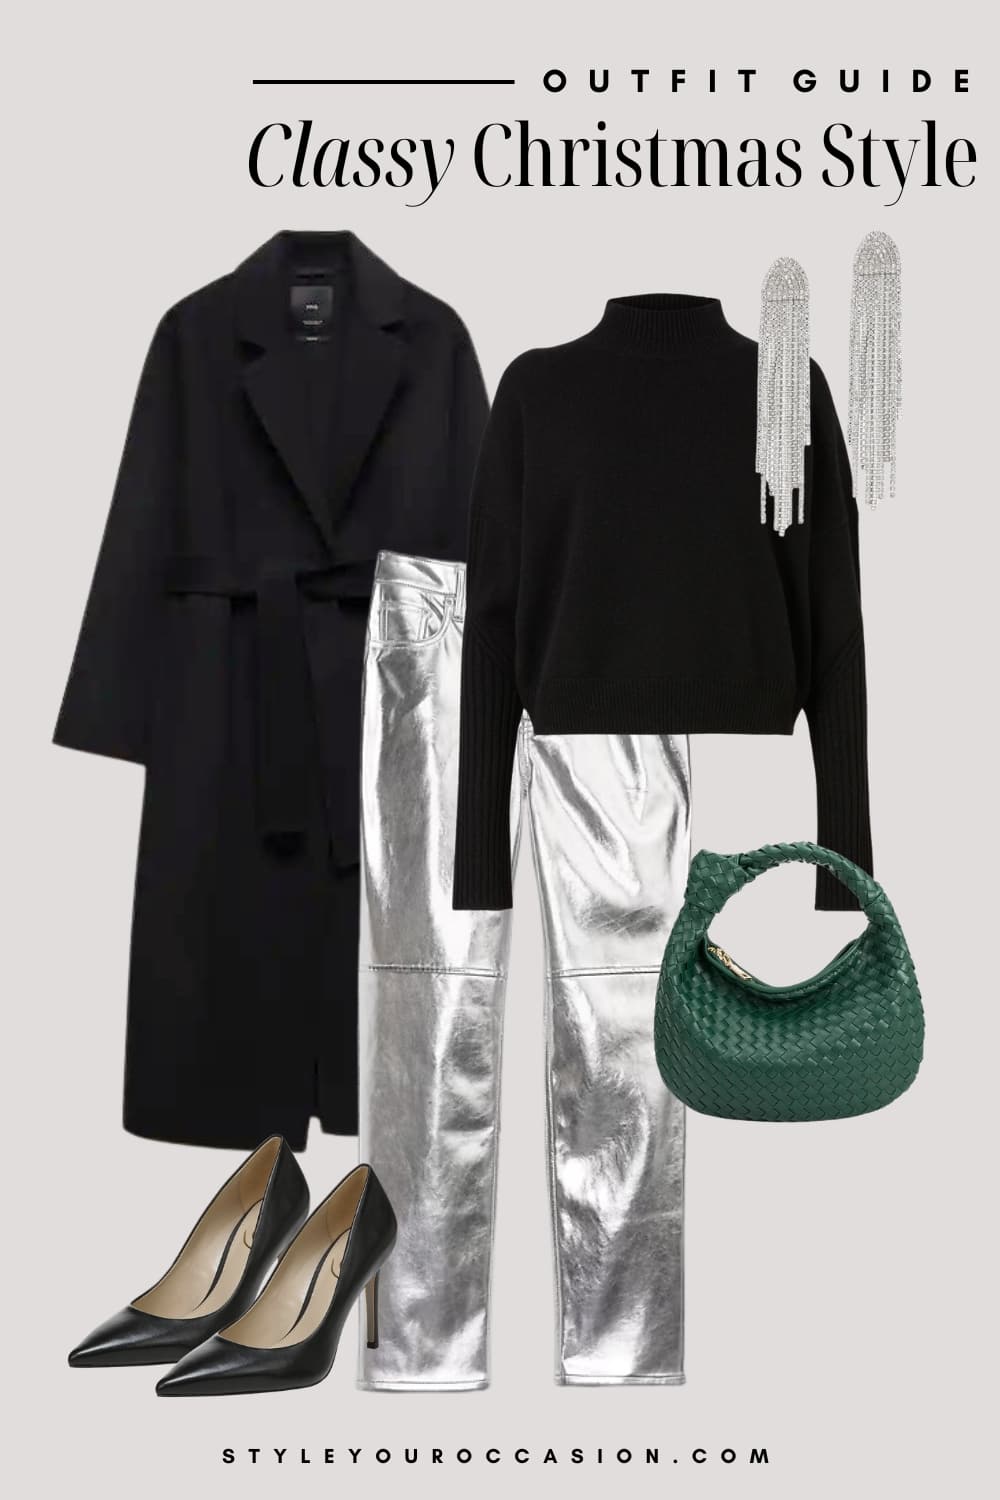 An image board of a Christmas outfit featuring silver straight leg pants, a black mock neck sweater, a long black wool coat, black pumps, a woven green handbag, and sparkly silver dangly earrings